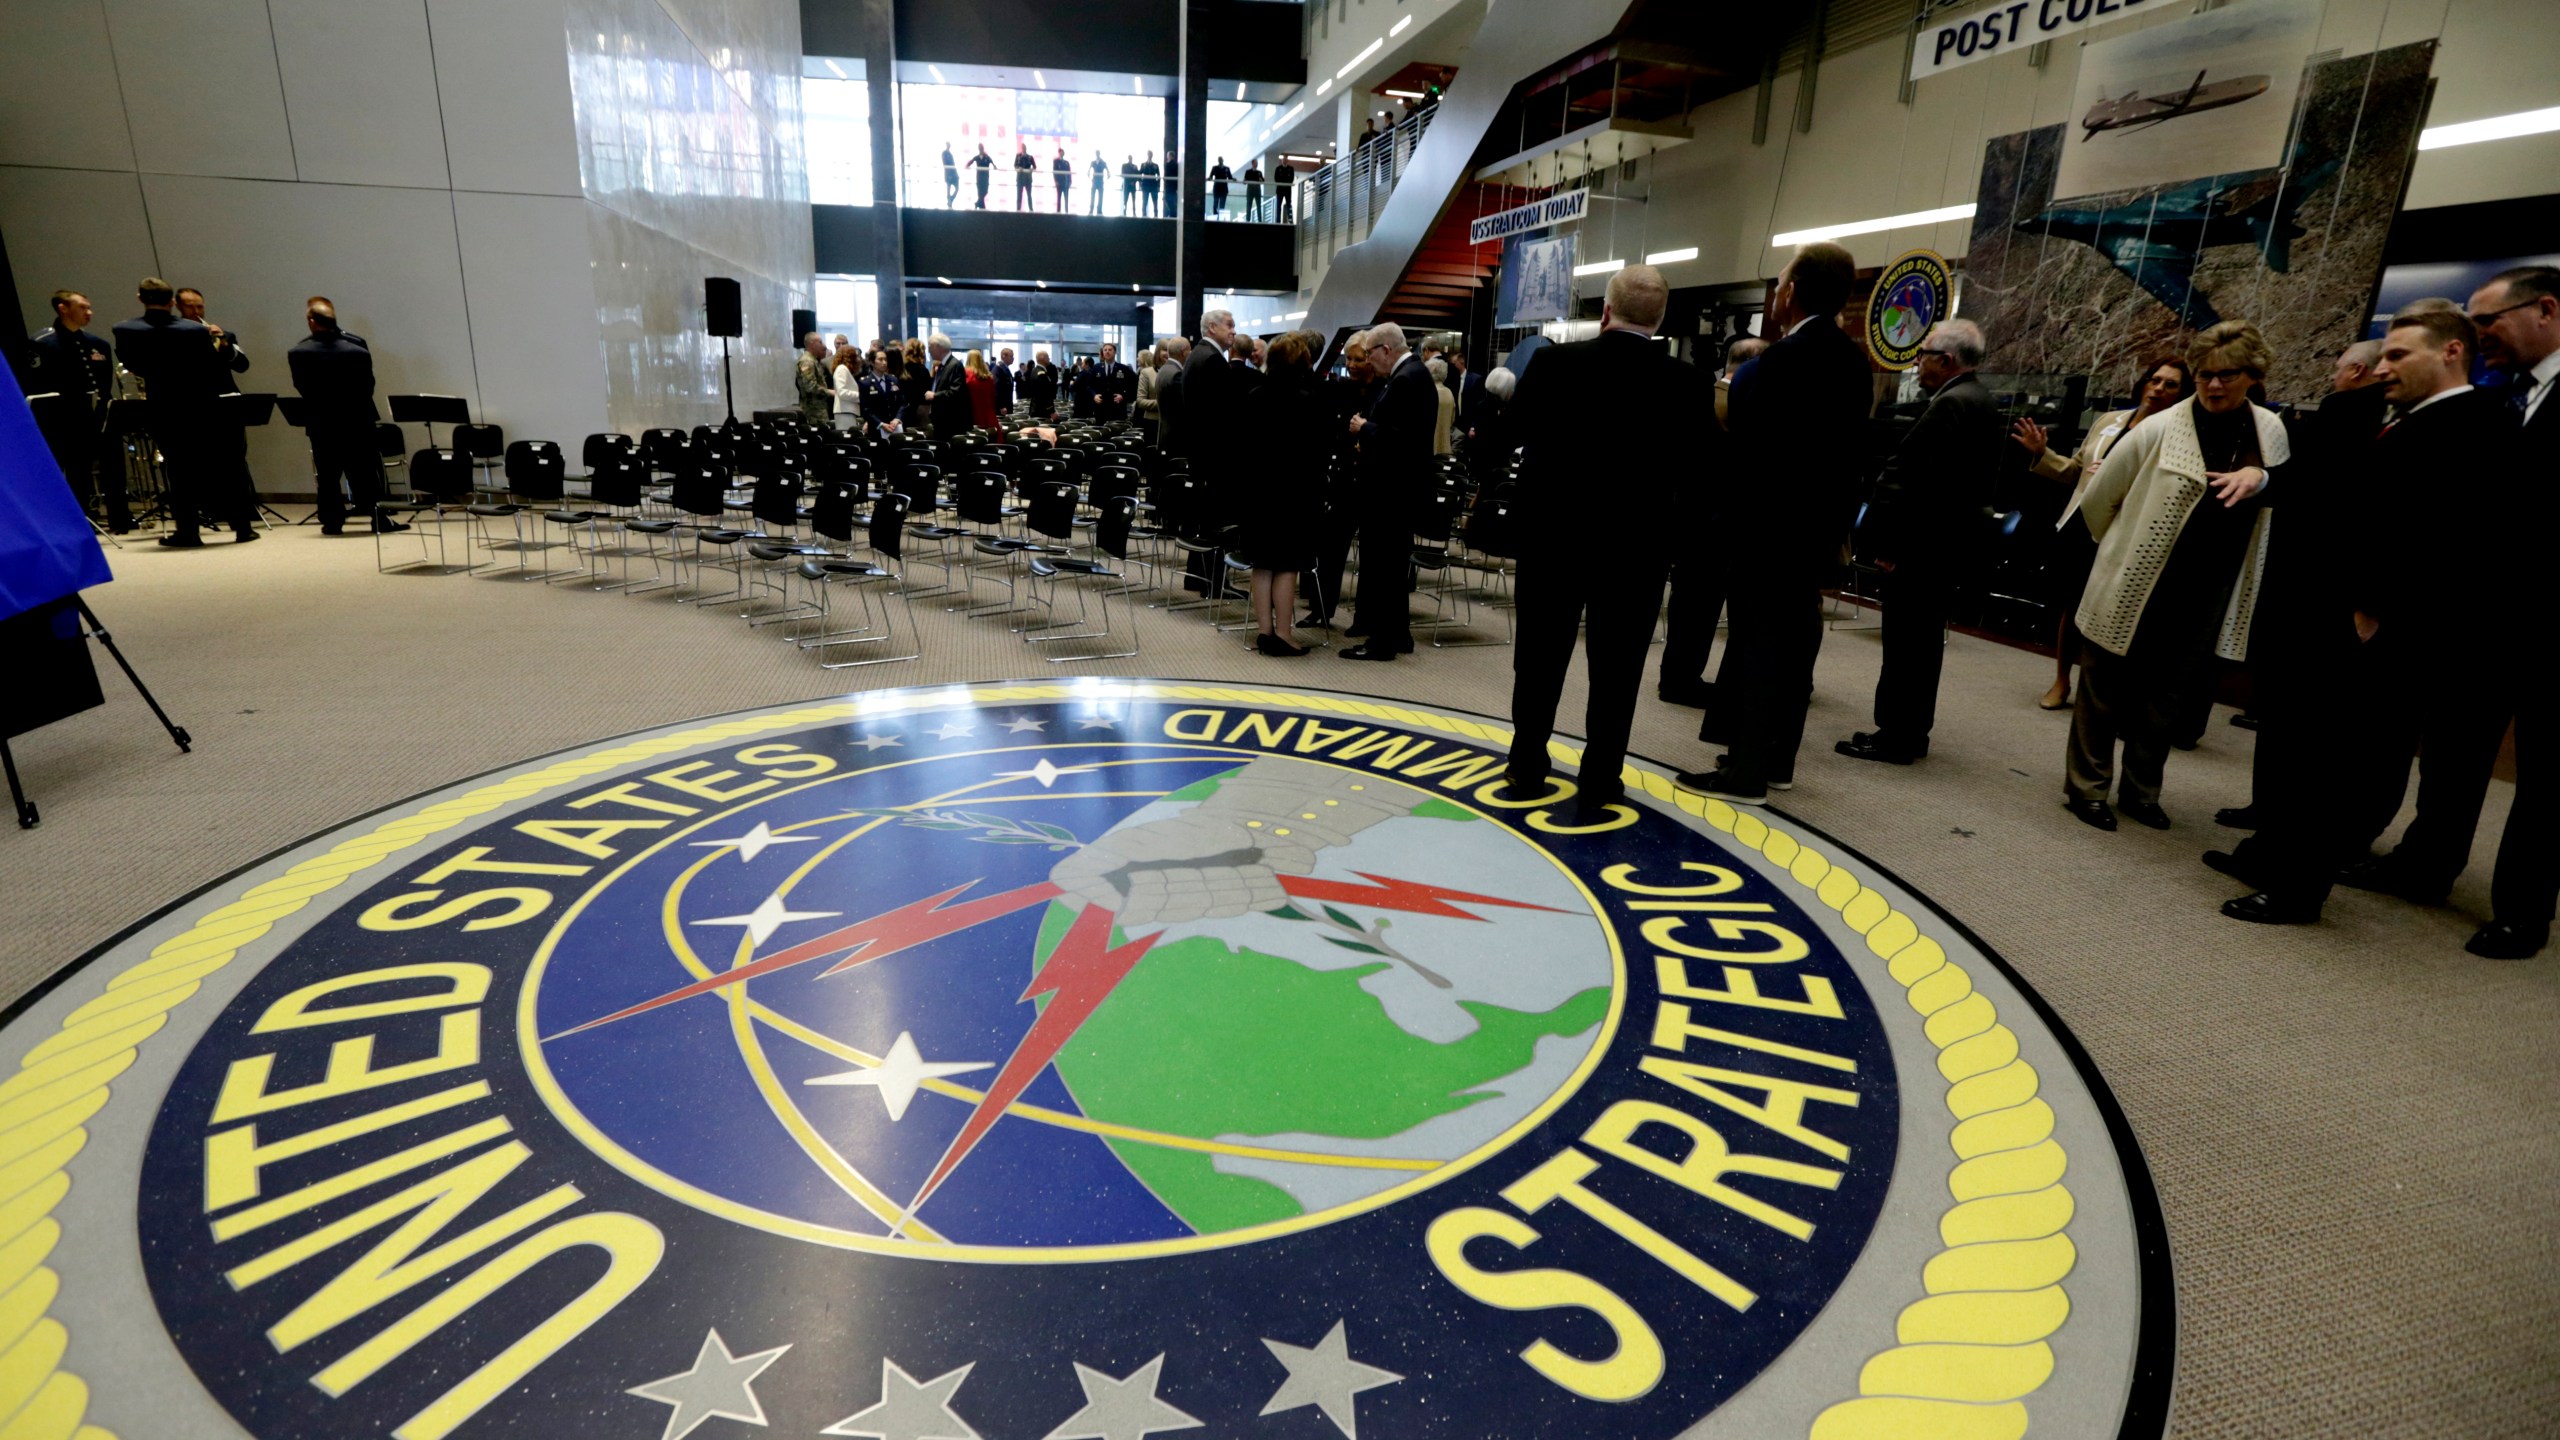 FILE - The atrium of C2F, US Strategic Command's new command and control facility at Offutt AFB in Neb., is seen before its dedication ceremony in honor of General Curtis E. LeMay Nov. 18, 2019. The Justice Department says a civilian U.S. Air Force employee has been charged in federal court in Nebraska with transmitting classified information about Russia's war with Ukraine on a foreign online dating platform. (AP Photo/Nati Harnik, File)